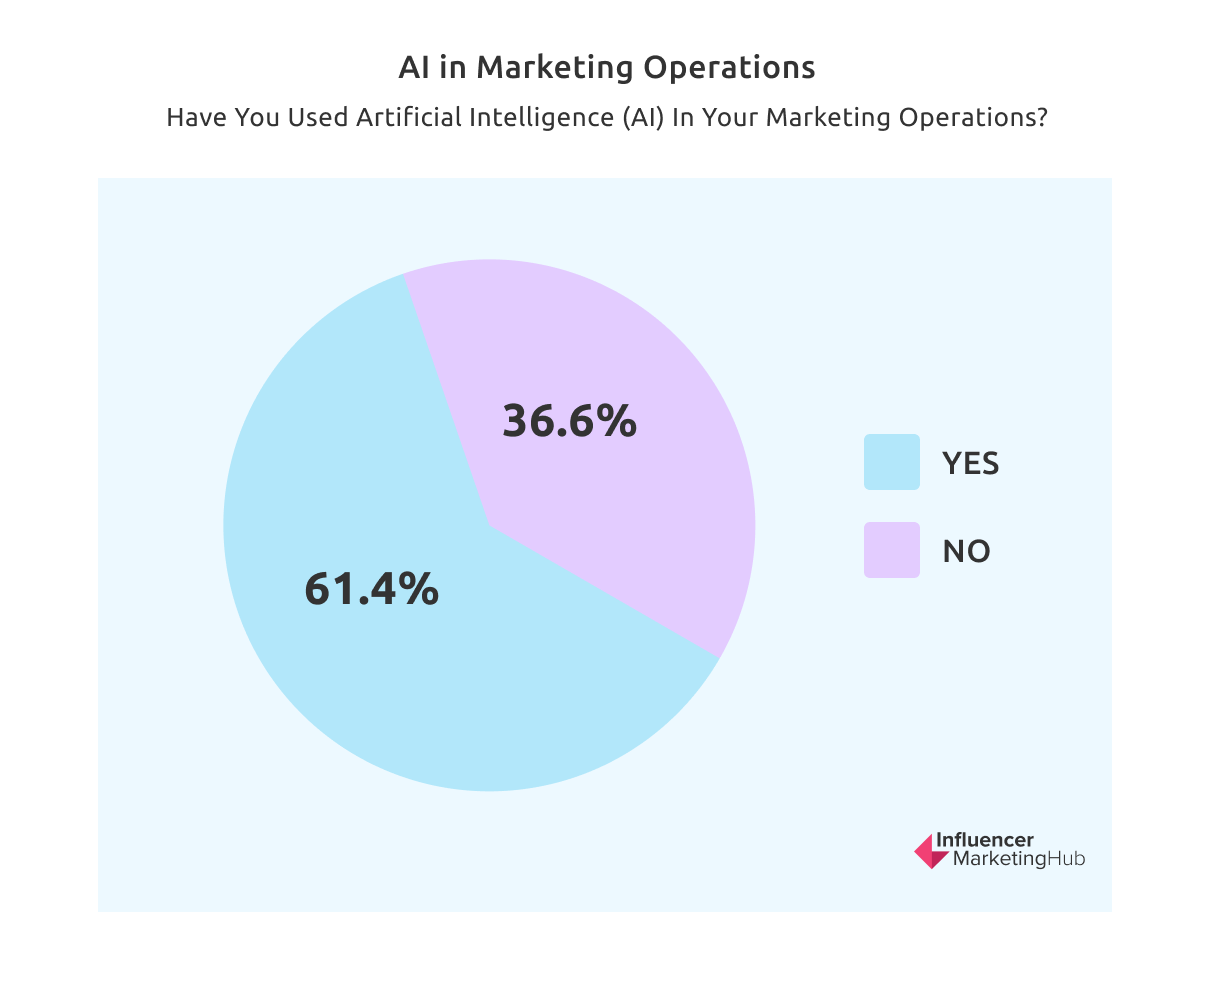 AI Content and Marketing Statistics about marketing operations